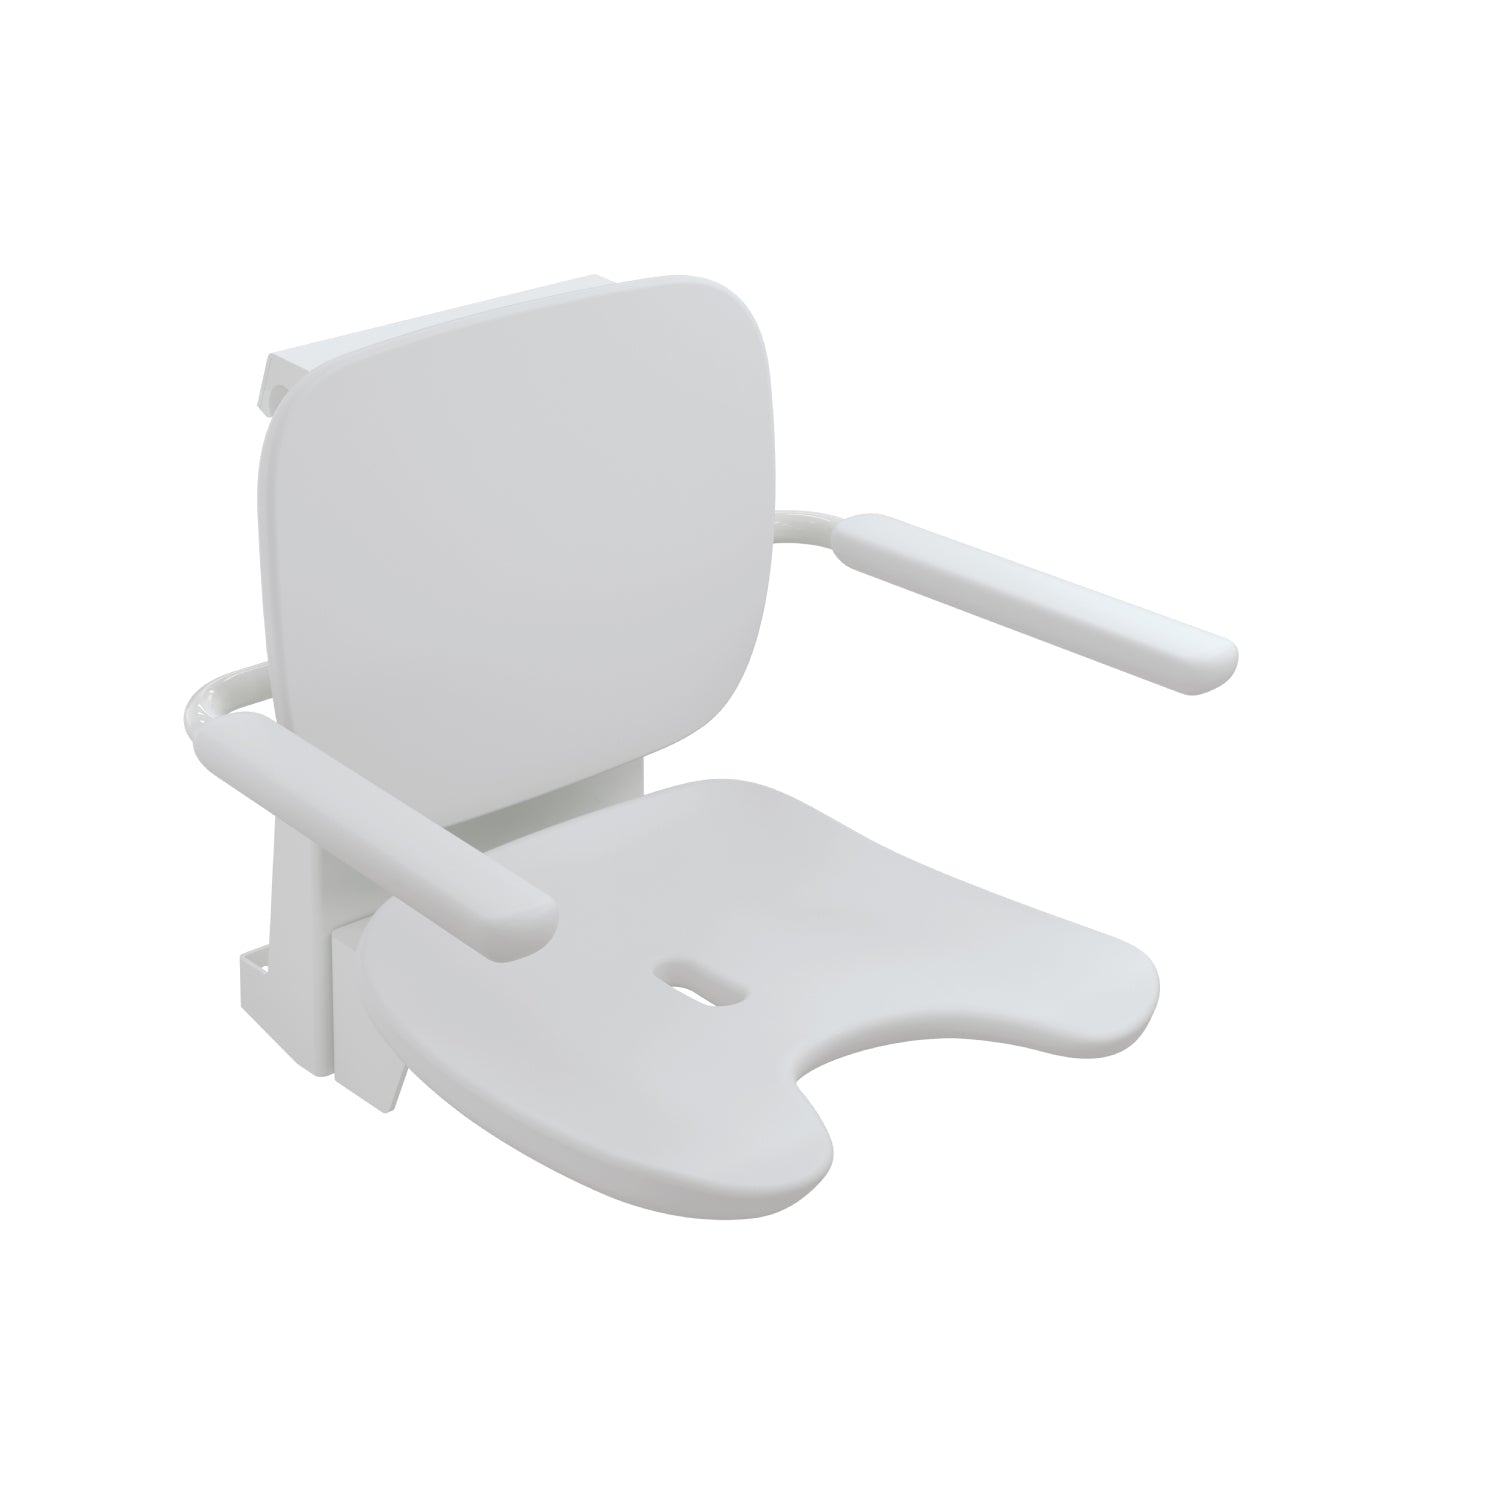 Desergo Hanging Seat with a white finish on a white background